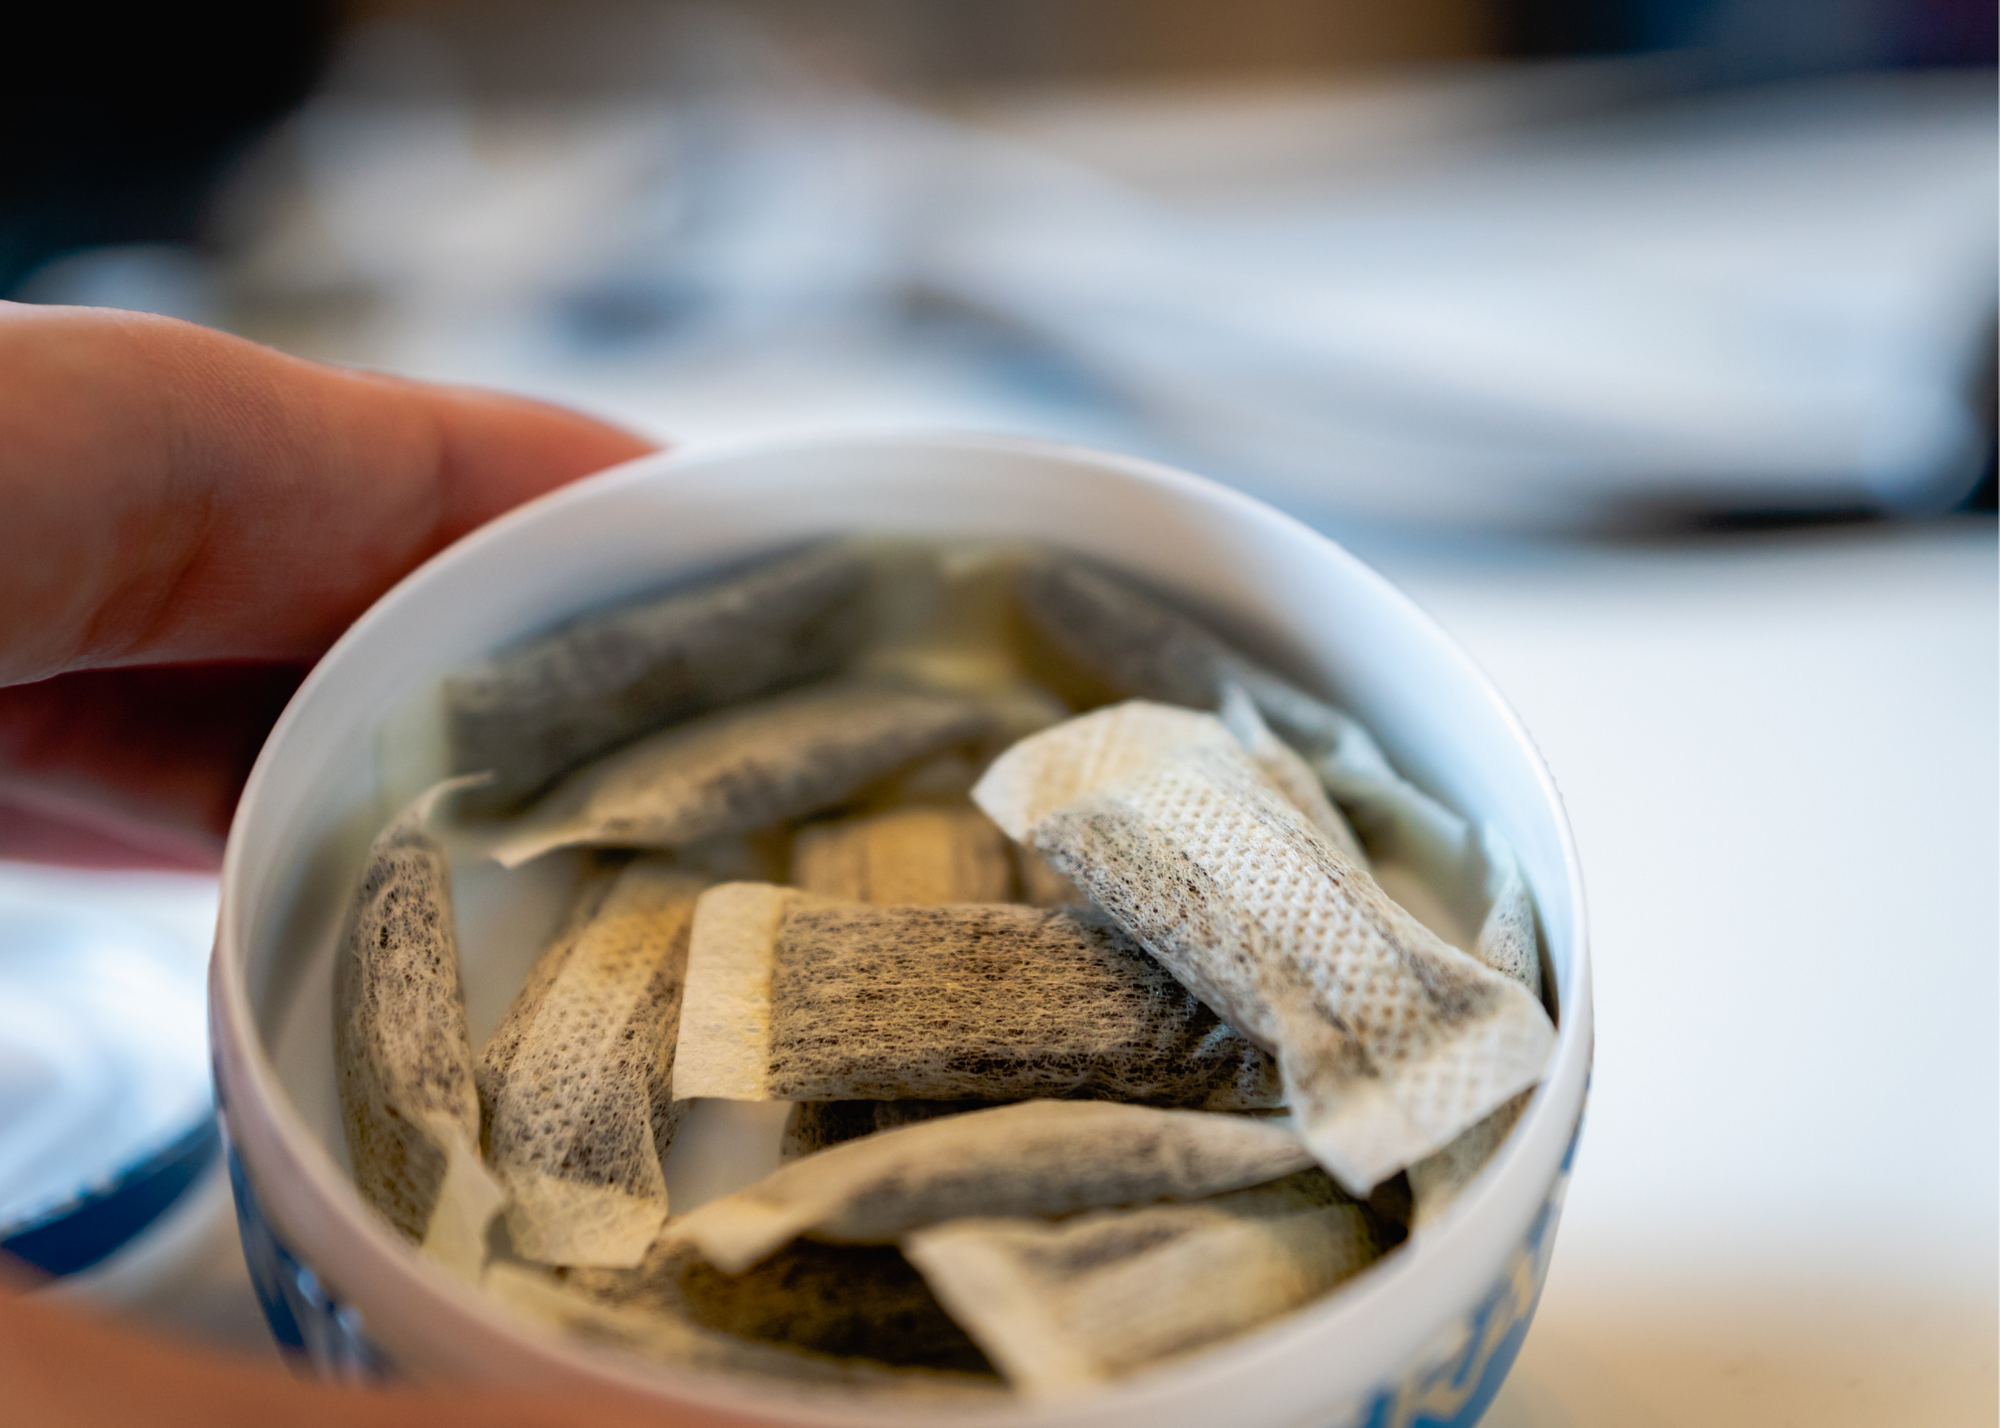 What is snus and how did it help Sweden ban cigarettes?